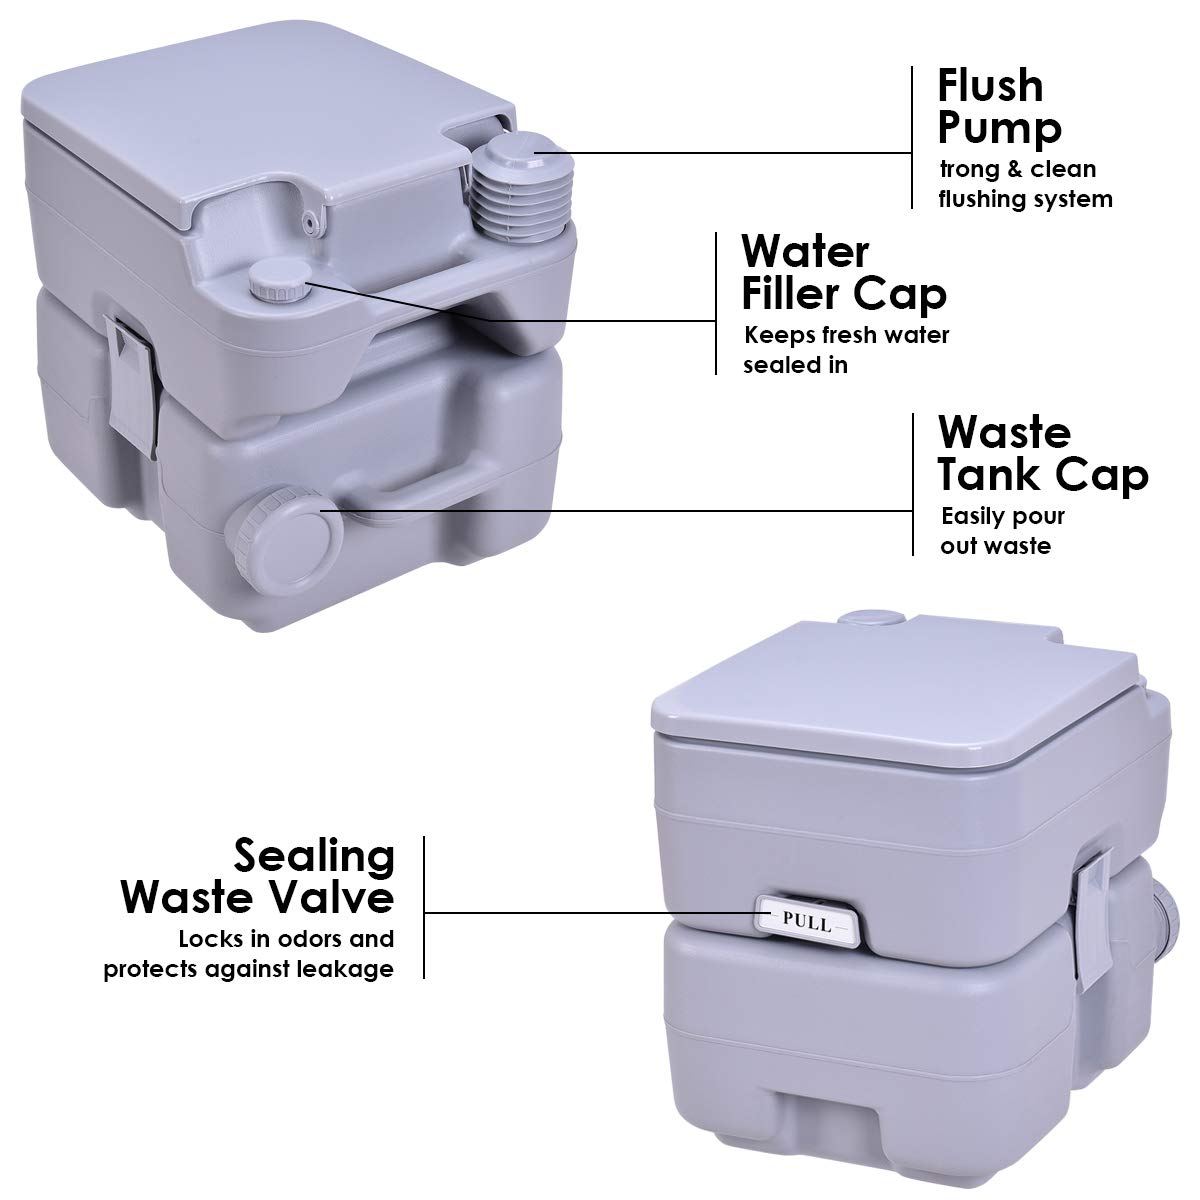 Portable Toilet 5.3 Gallon with T-Shaped Flush System